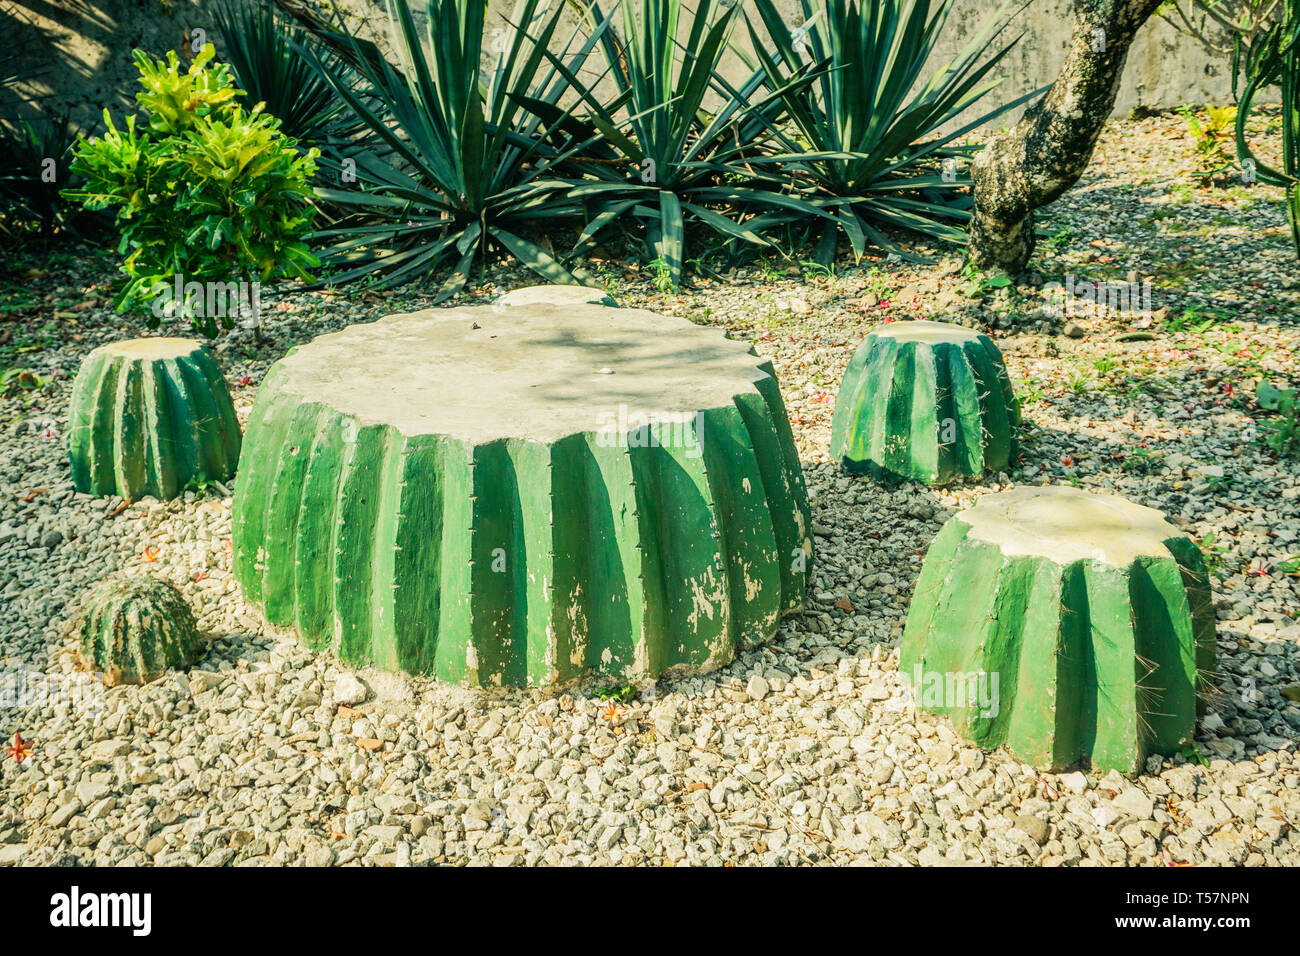 Chair Decoration Made From Cement Block Looks Like A Cactus Green